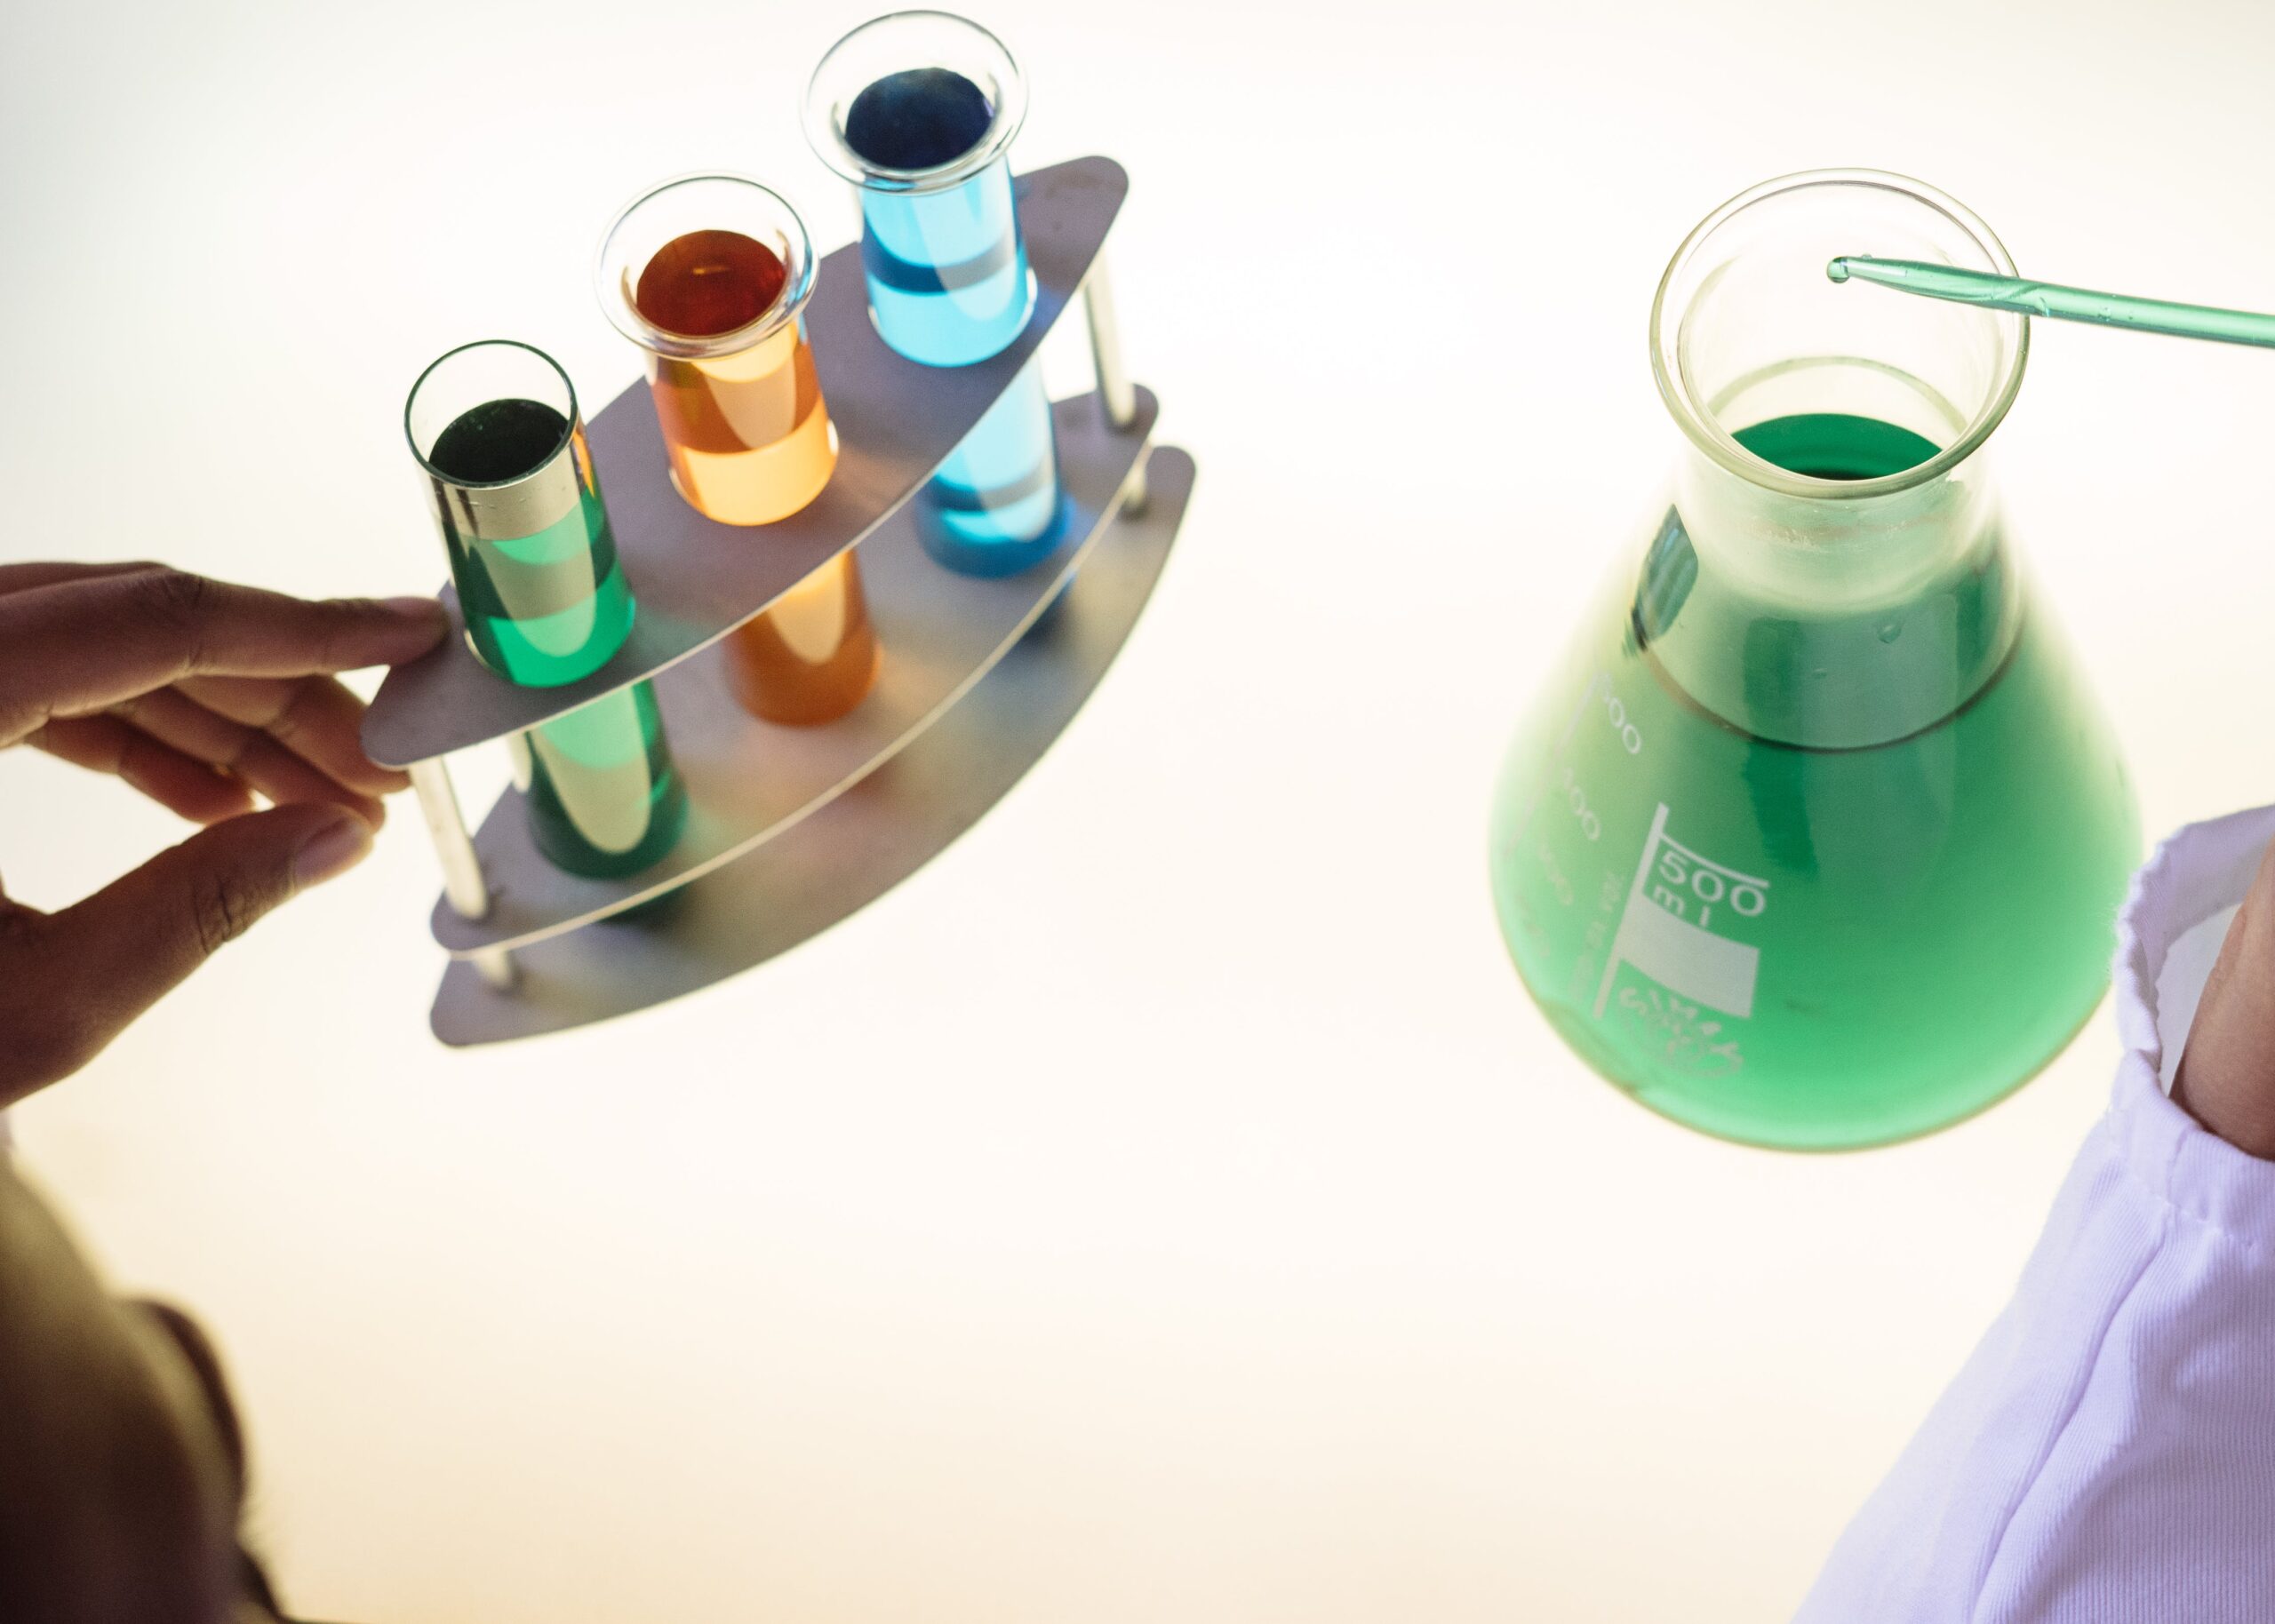 Chemistry bottles with different coloured liquids - testing econometric models